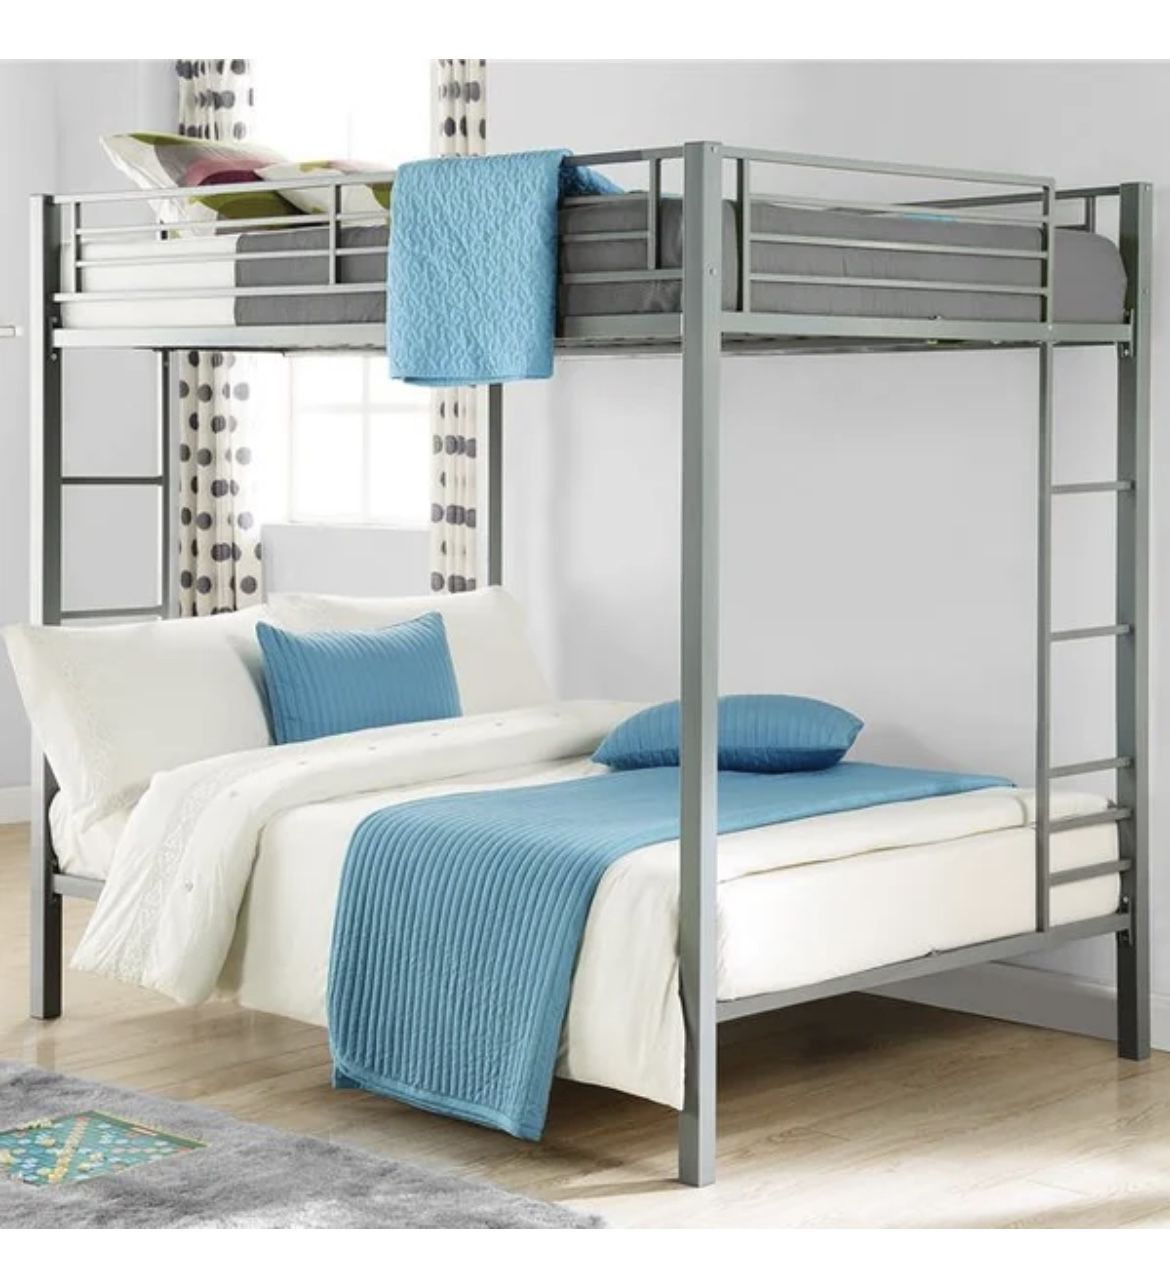 Bunk Bed & Mattress-Used 